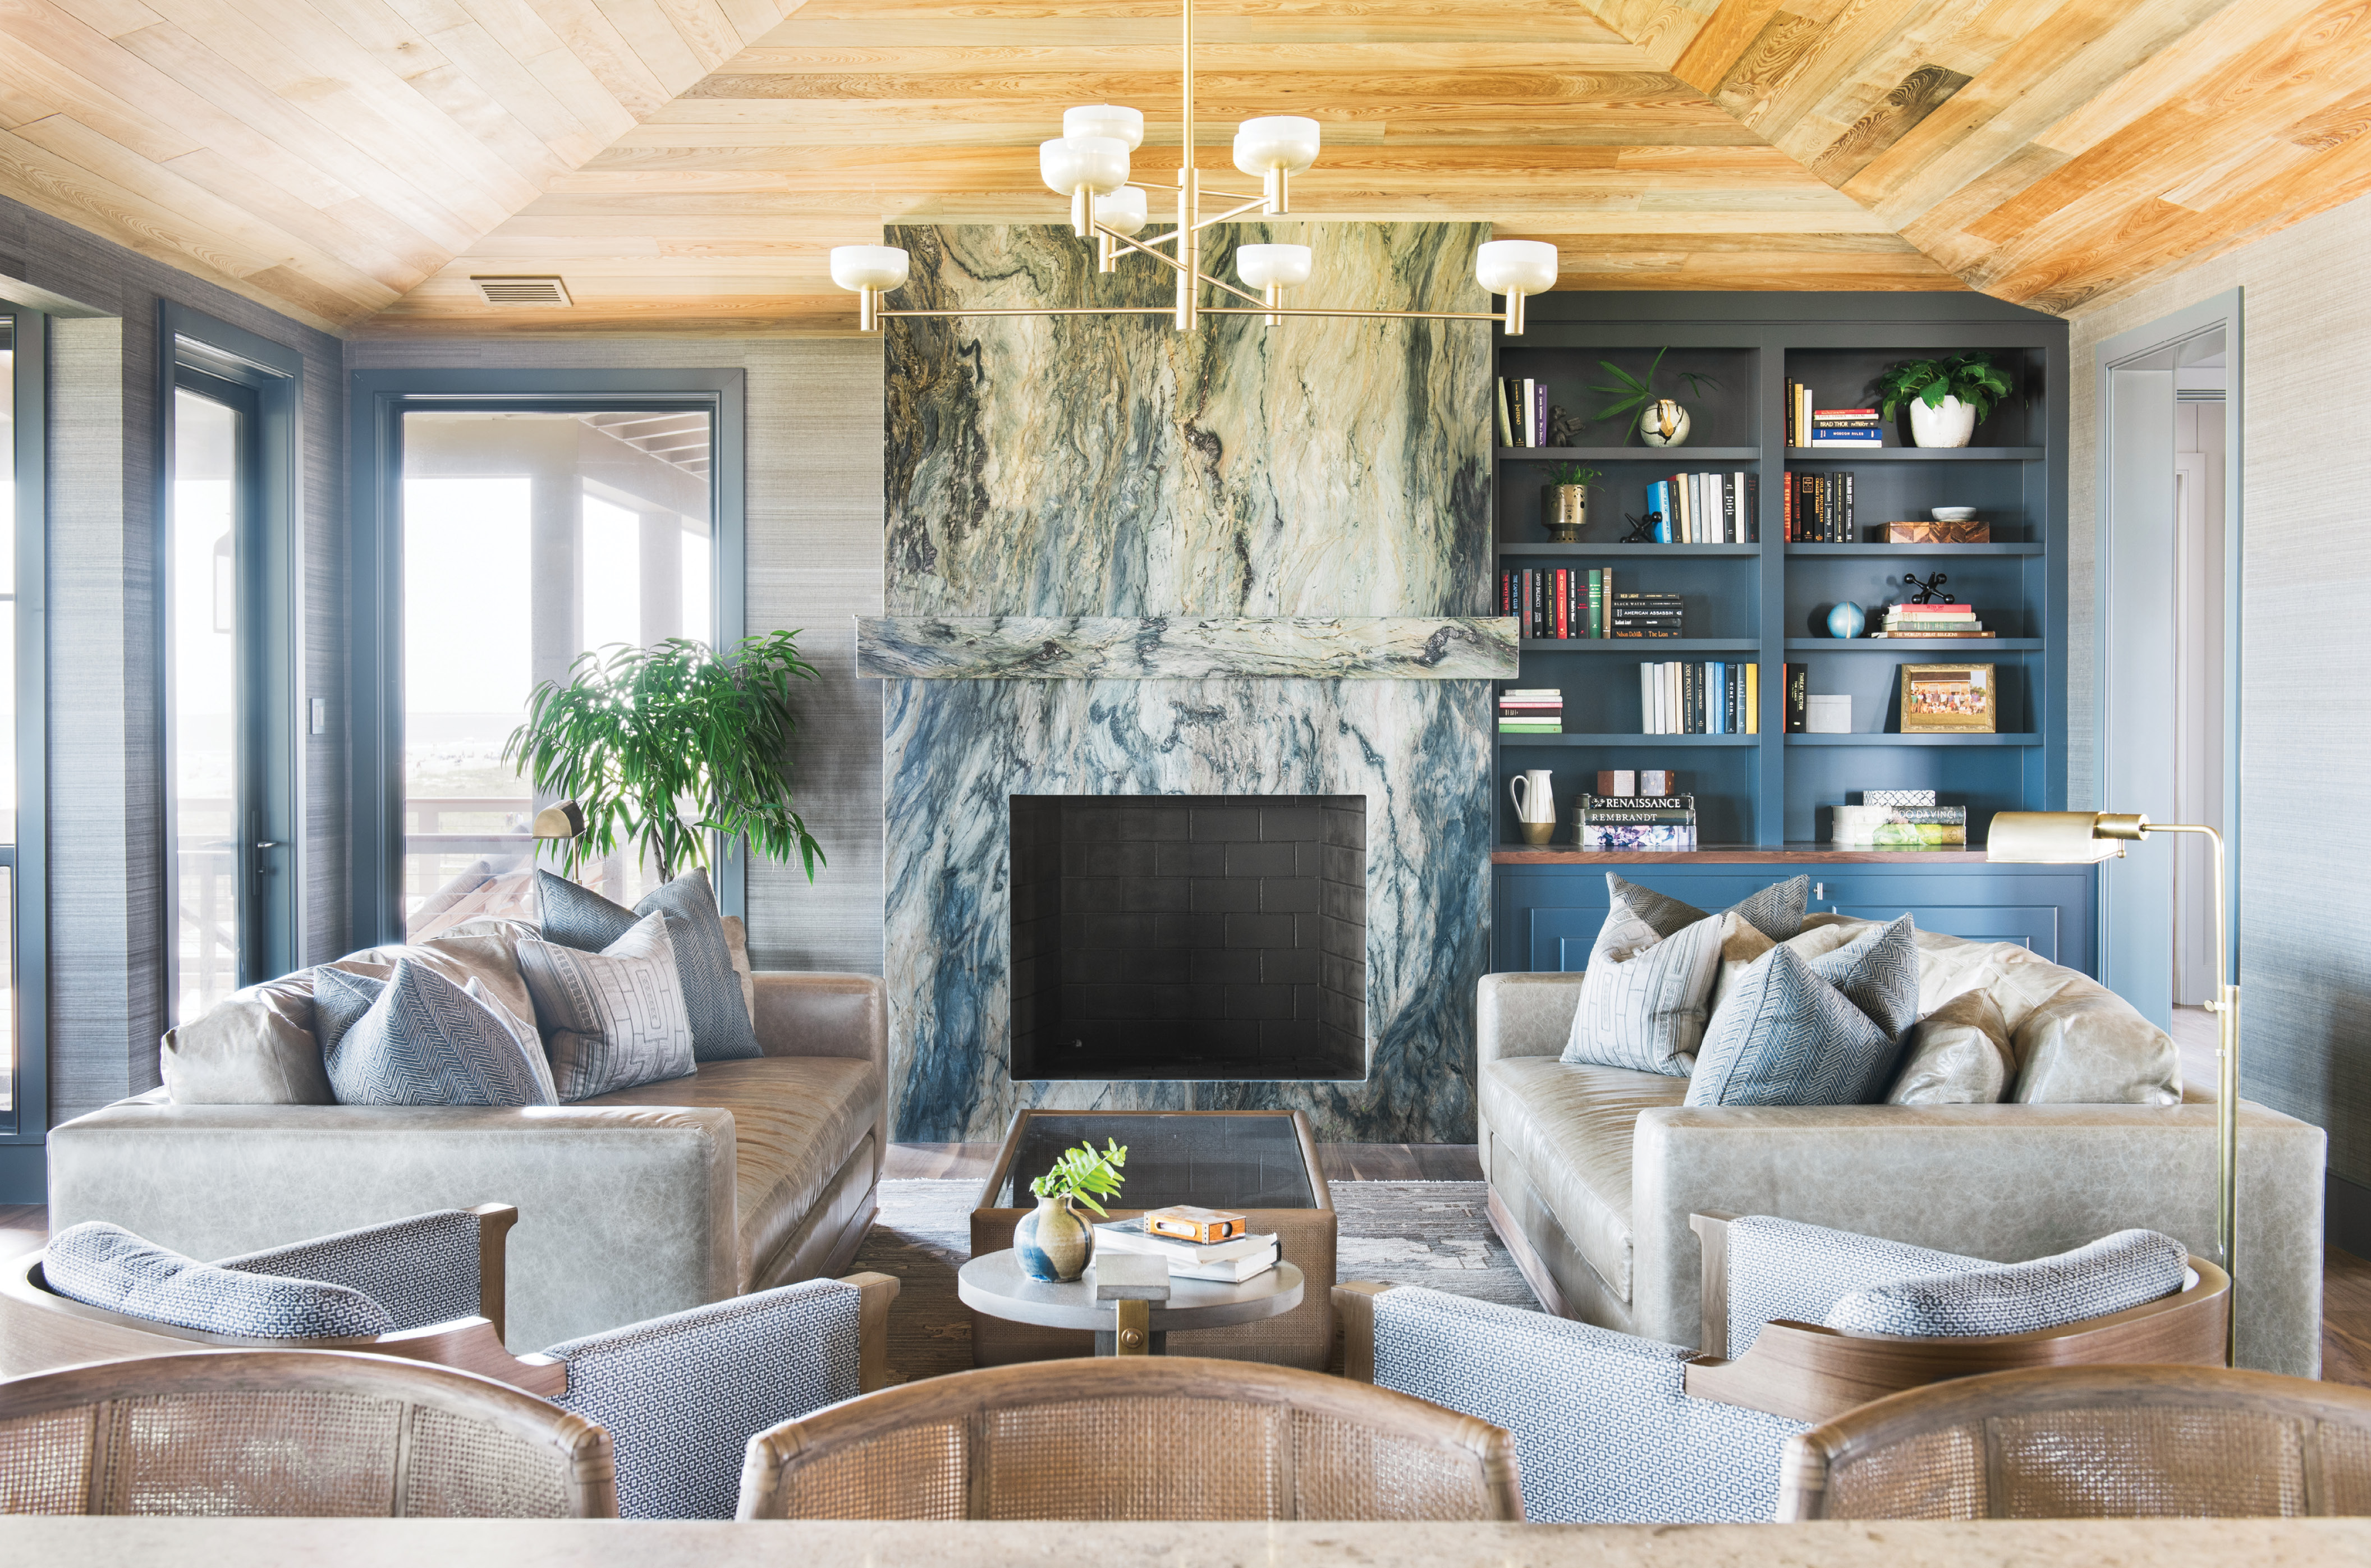 With the Tide: Situated on the top floor, the main living space is dominated by a fireplace set in “Blue Tides” granite from AGM Imports. Horsehair grasscloth wallpaper in “Clydesdale” by Phillip Jeffries continues the textural feel evoked by the stone’s veining. Leather sofas from Verellen and Osborne &amp; Little fabric-clad club chairs by Holly Hunt lend warmth and comfort to the scene, illuminated by Cartwright New York’s hand-brushed brass “Otto Luce” chandelier.